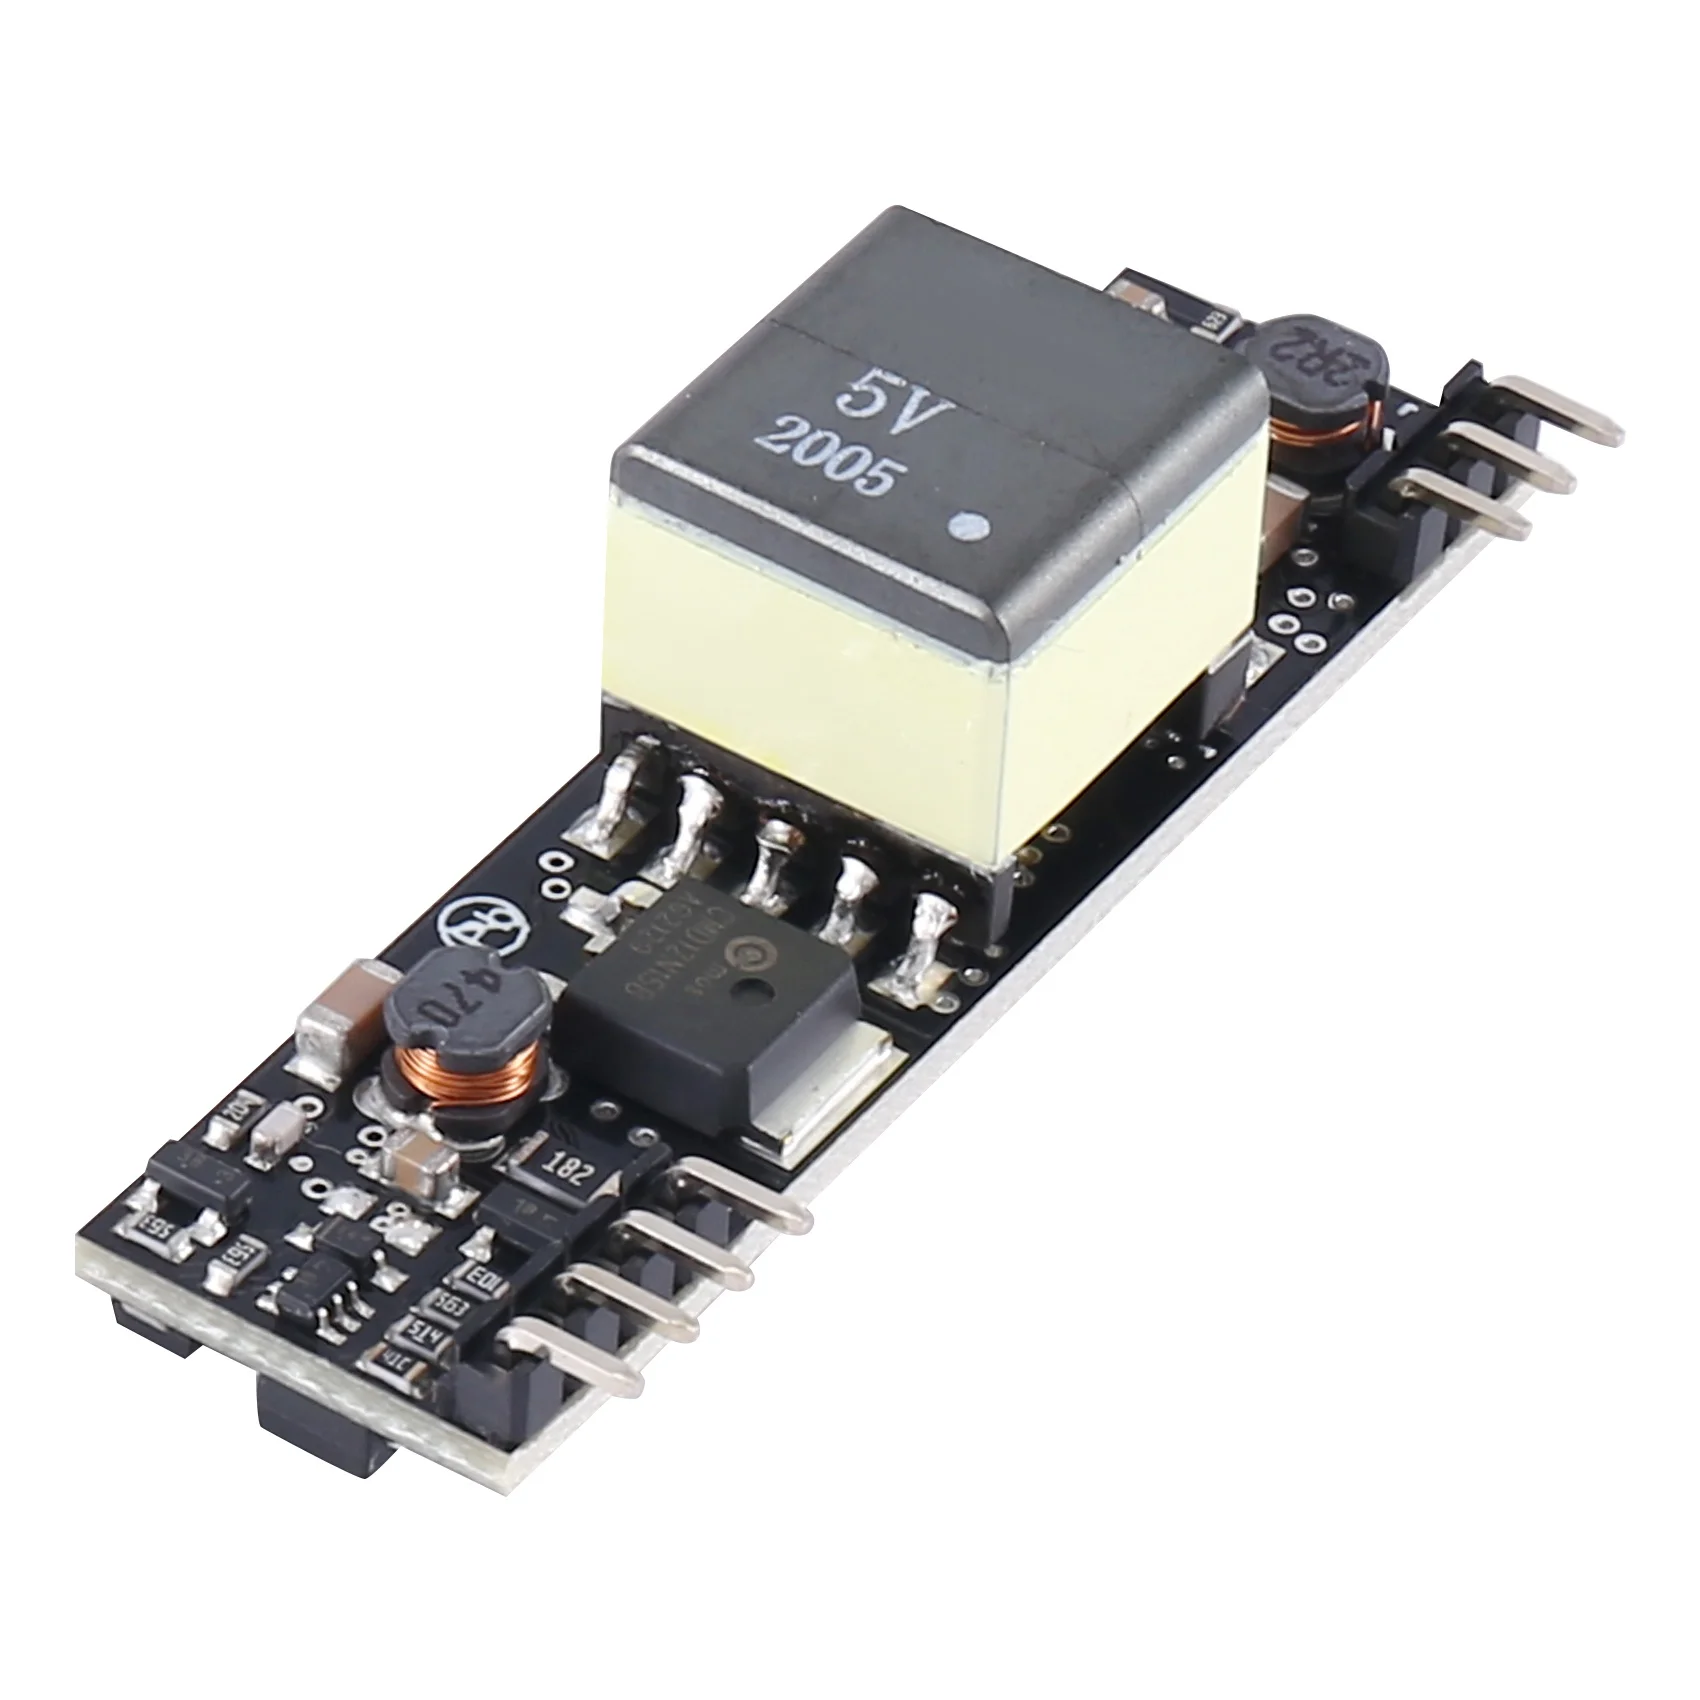 

New RT9400 POE PD Powers Module 13W IEEE802.3Af Module Low Output Ripple and Noise POE RT9400 Module(5V)